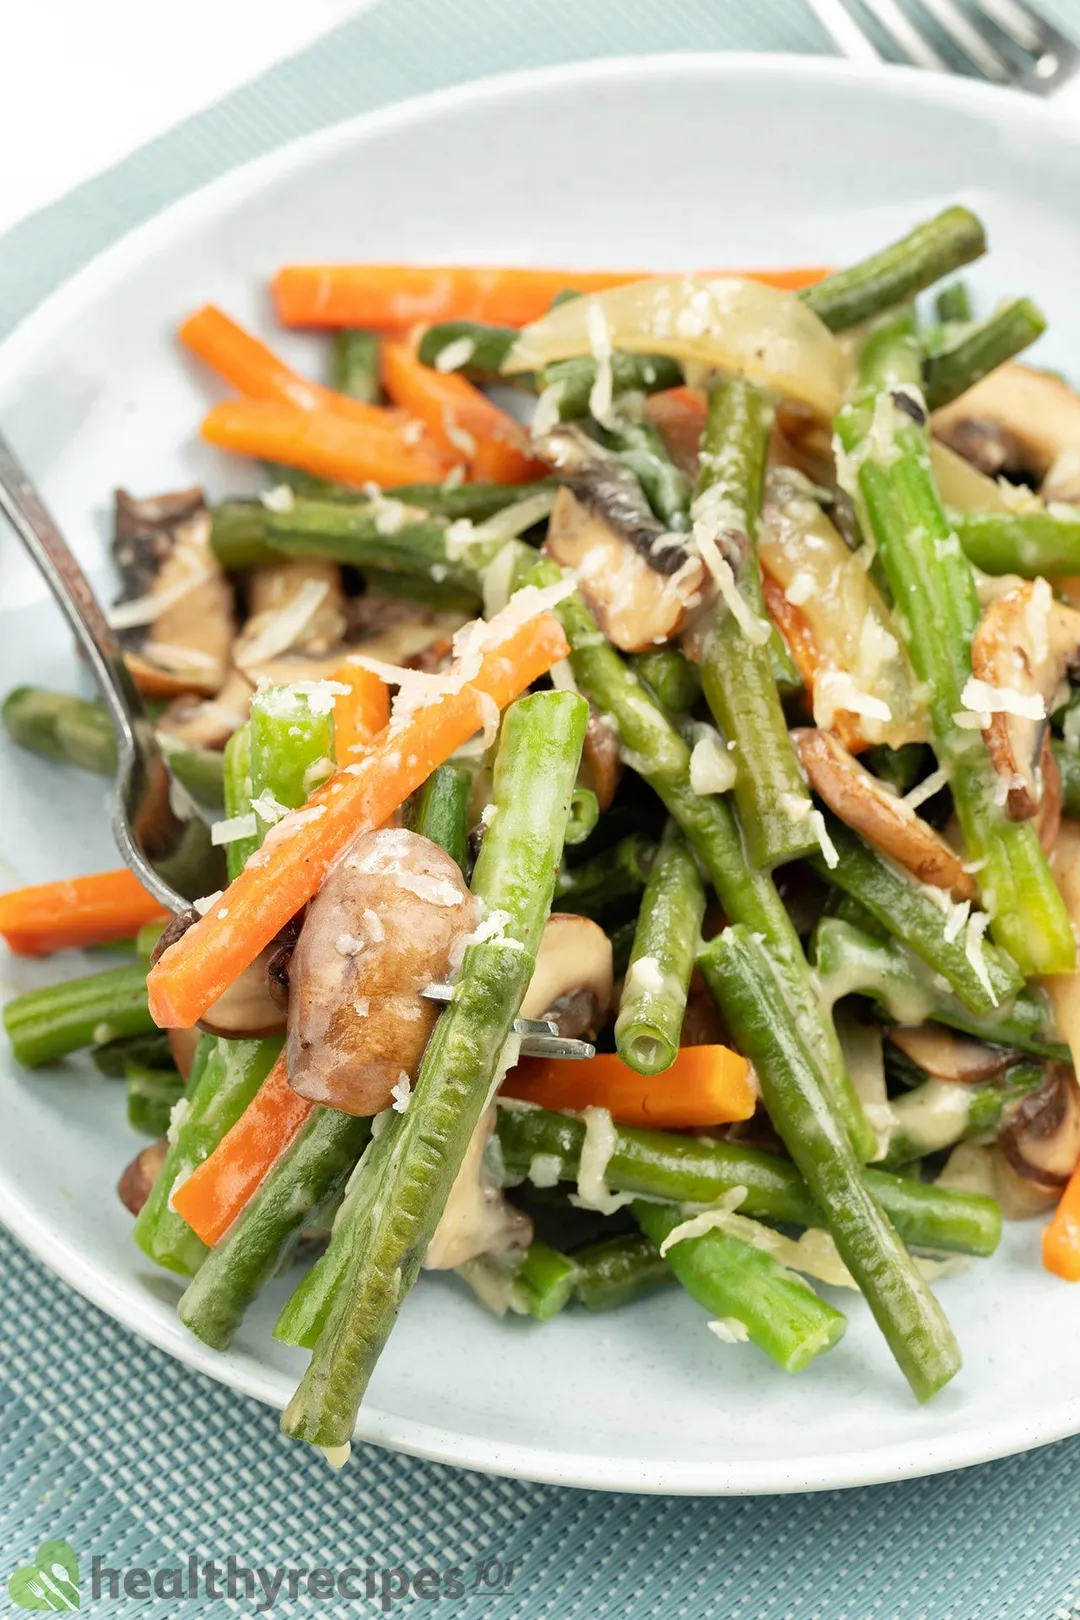 A plate of sauteed green beans, julienned carrots, and mushrooms.